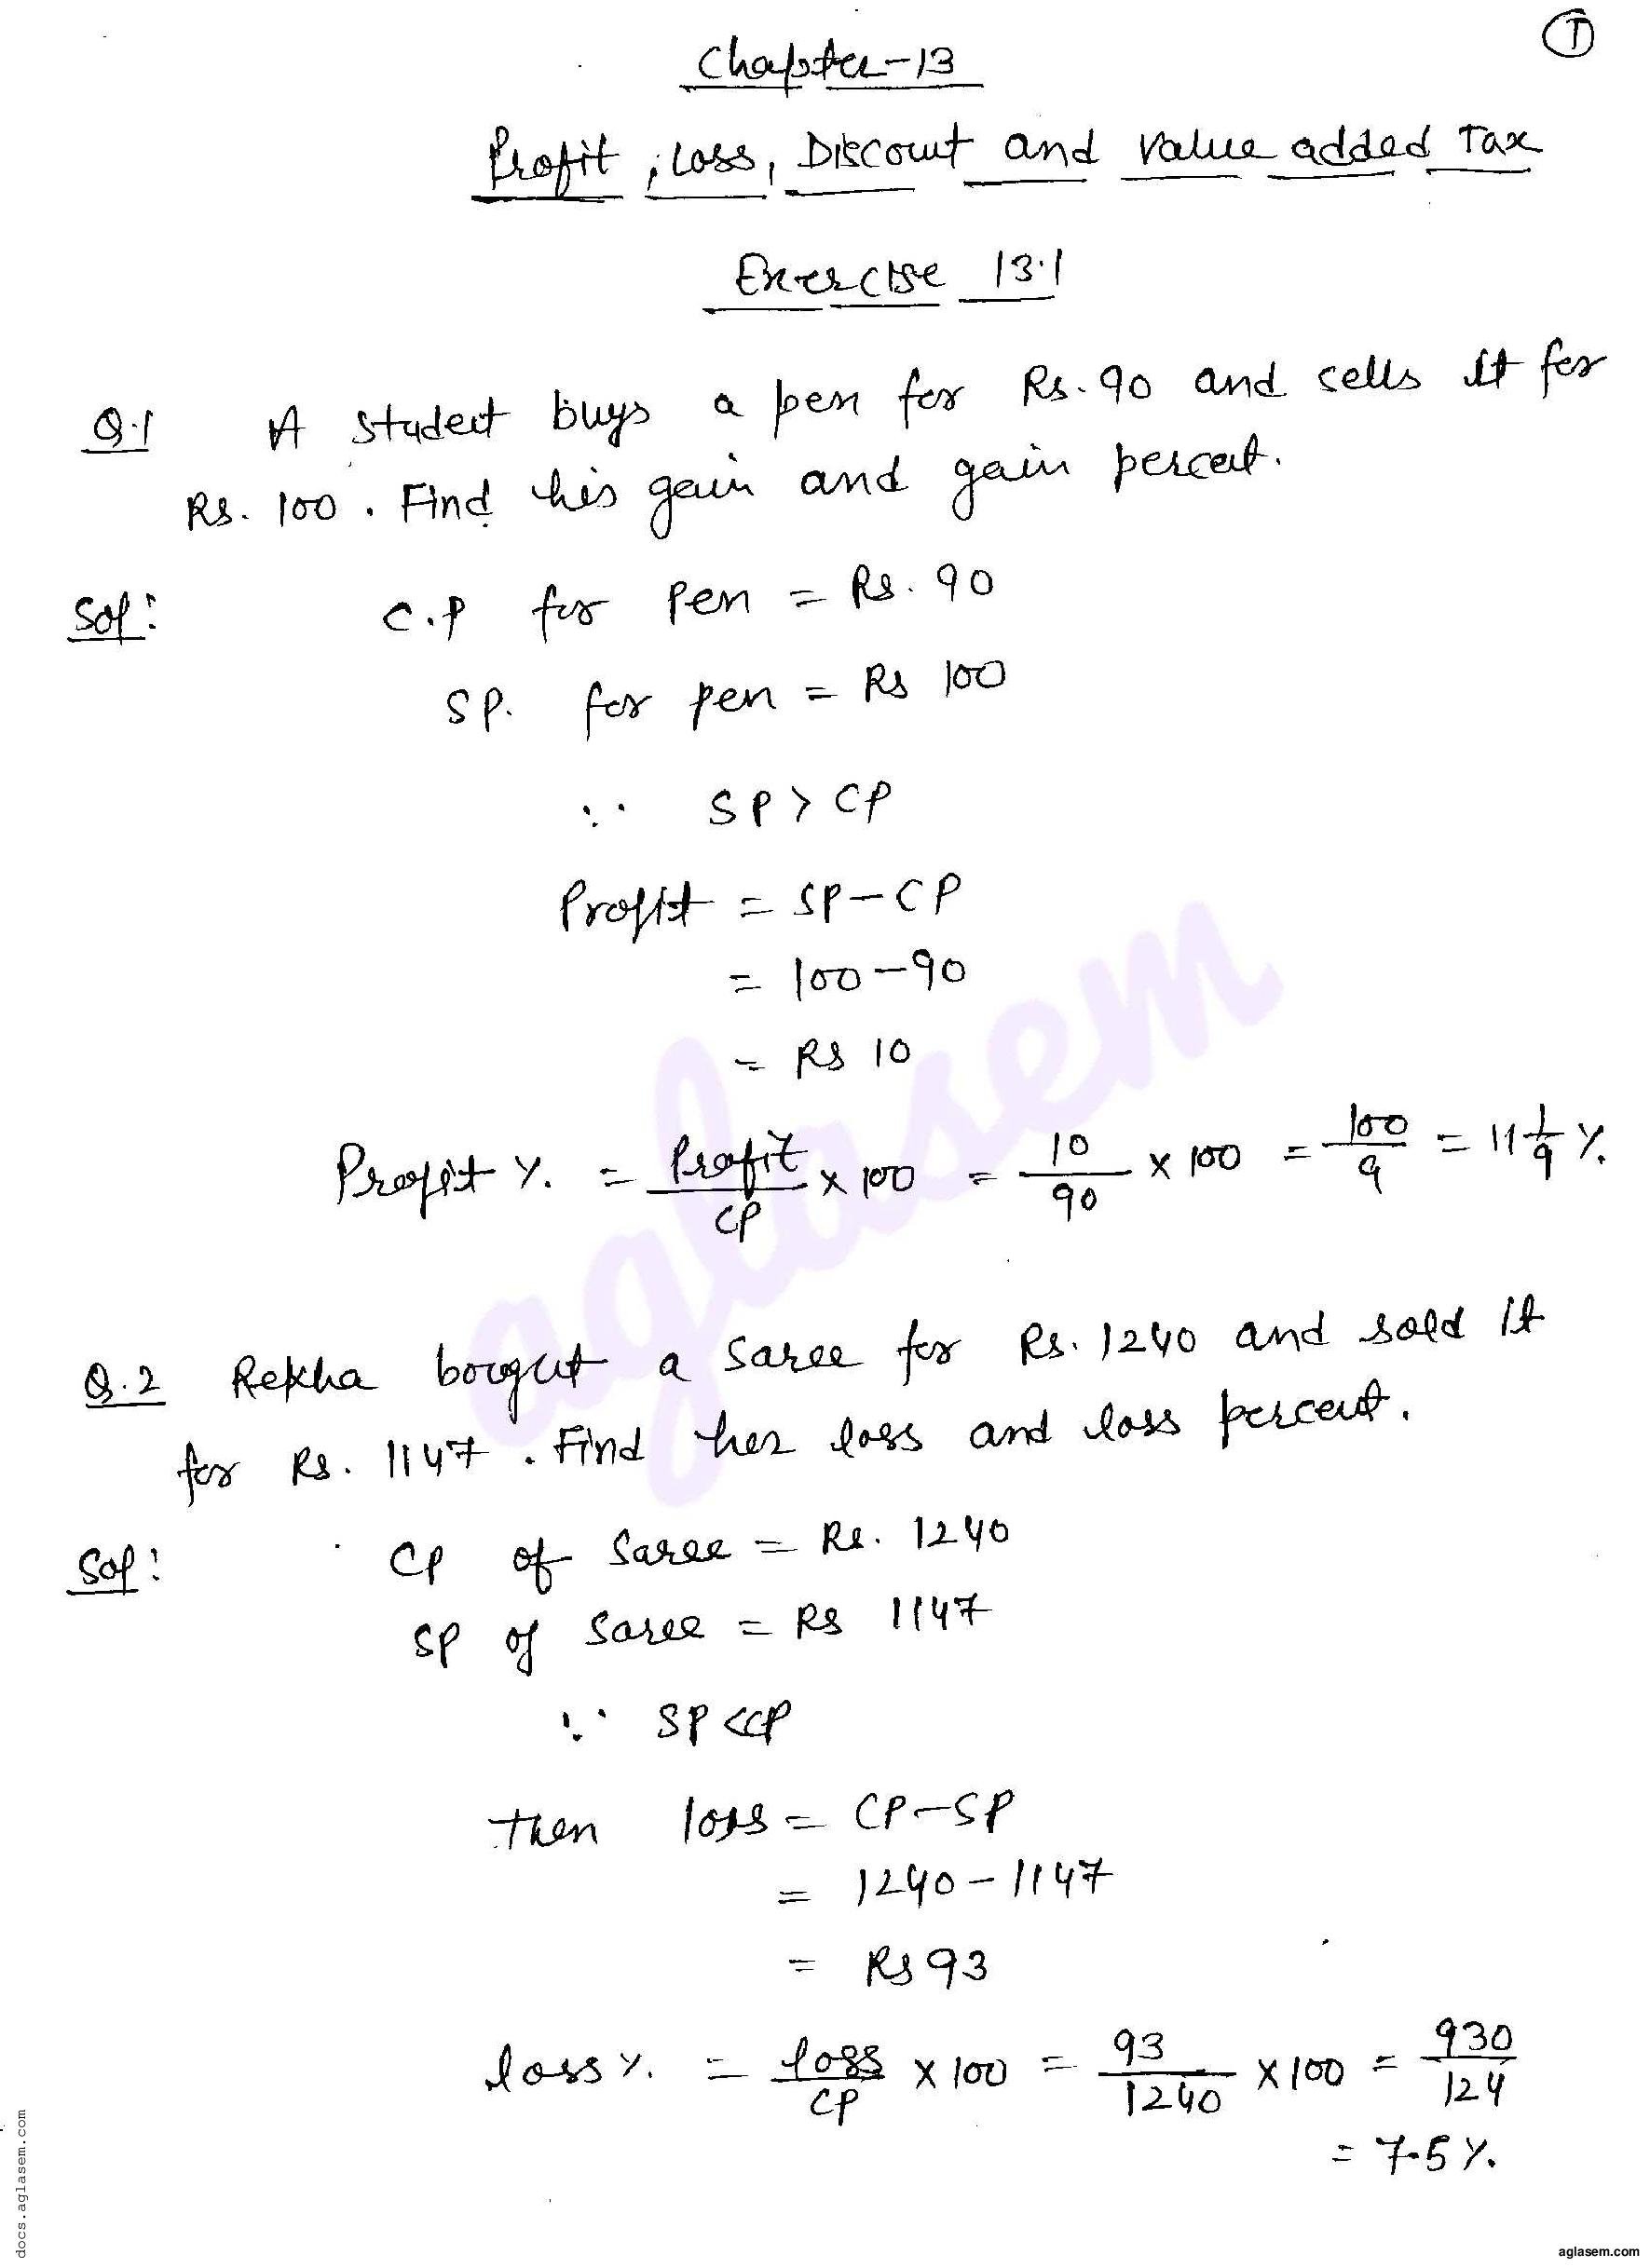 RD Sharma Solutions Class 8 Chapter 13 Profit, Loss, Discount and VAT Exercise 13.1 - Page 1